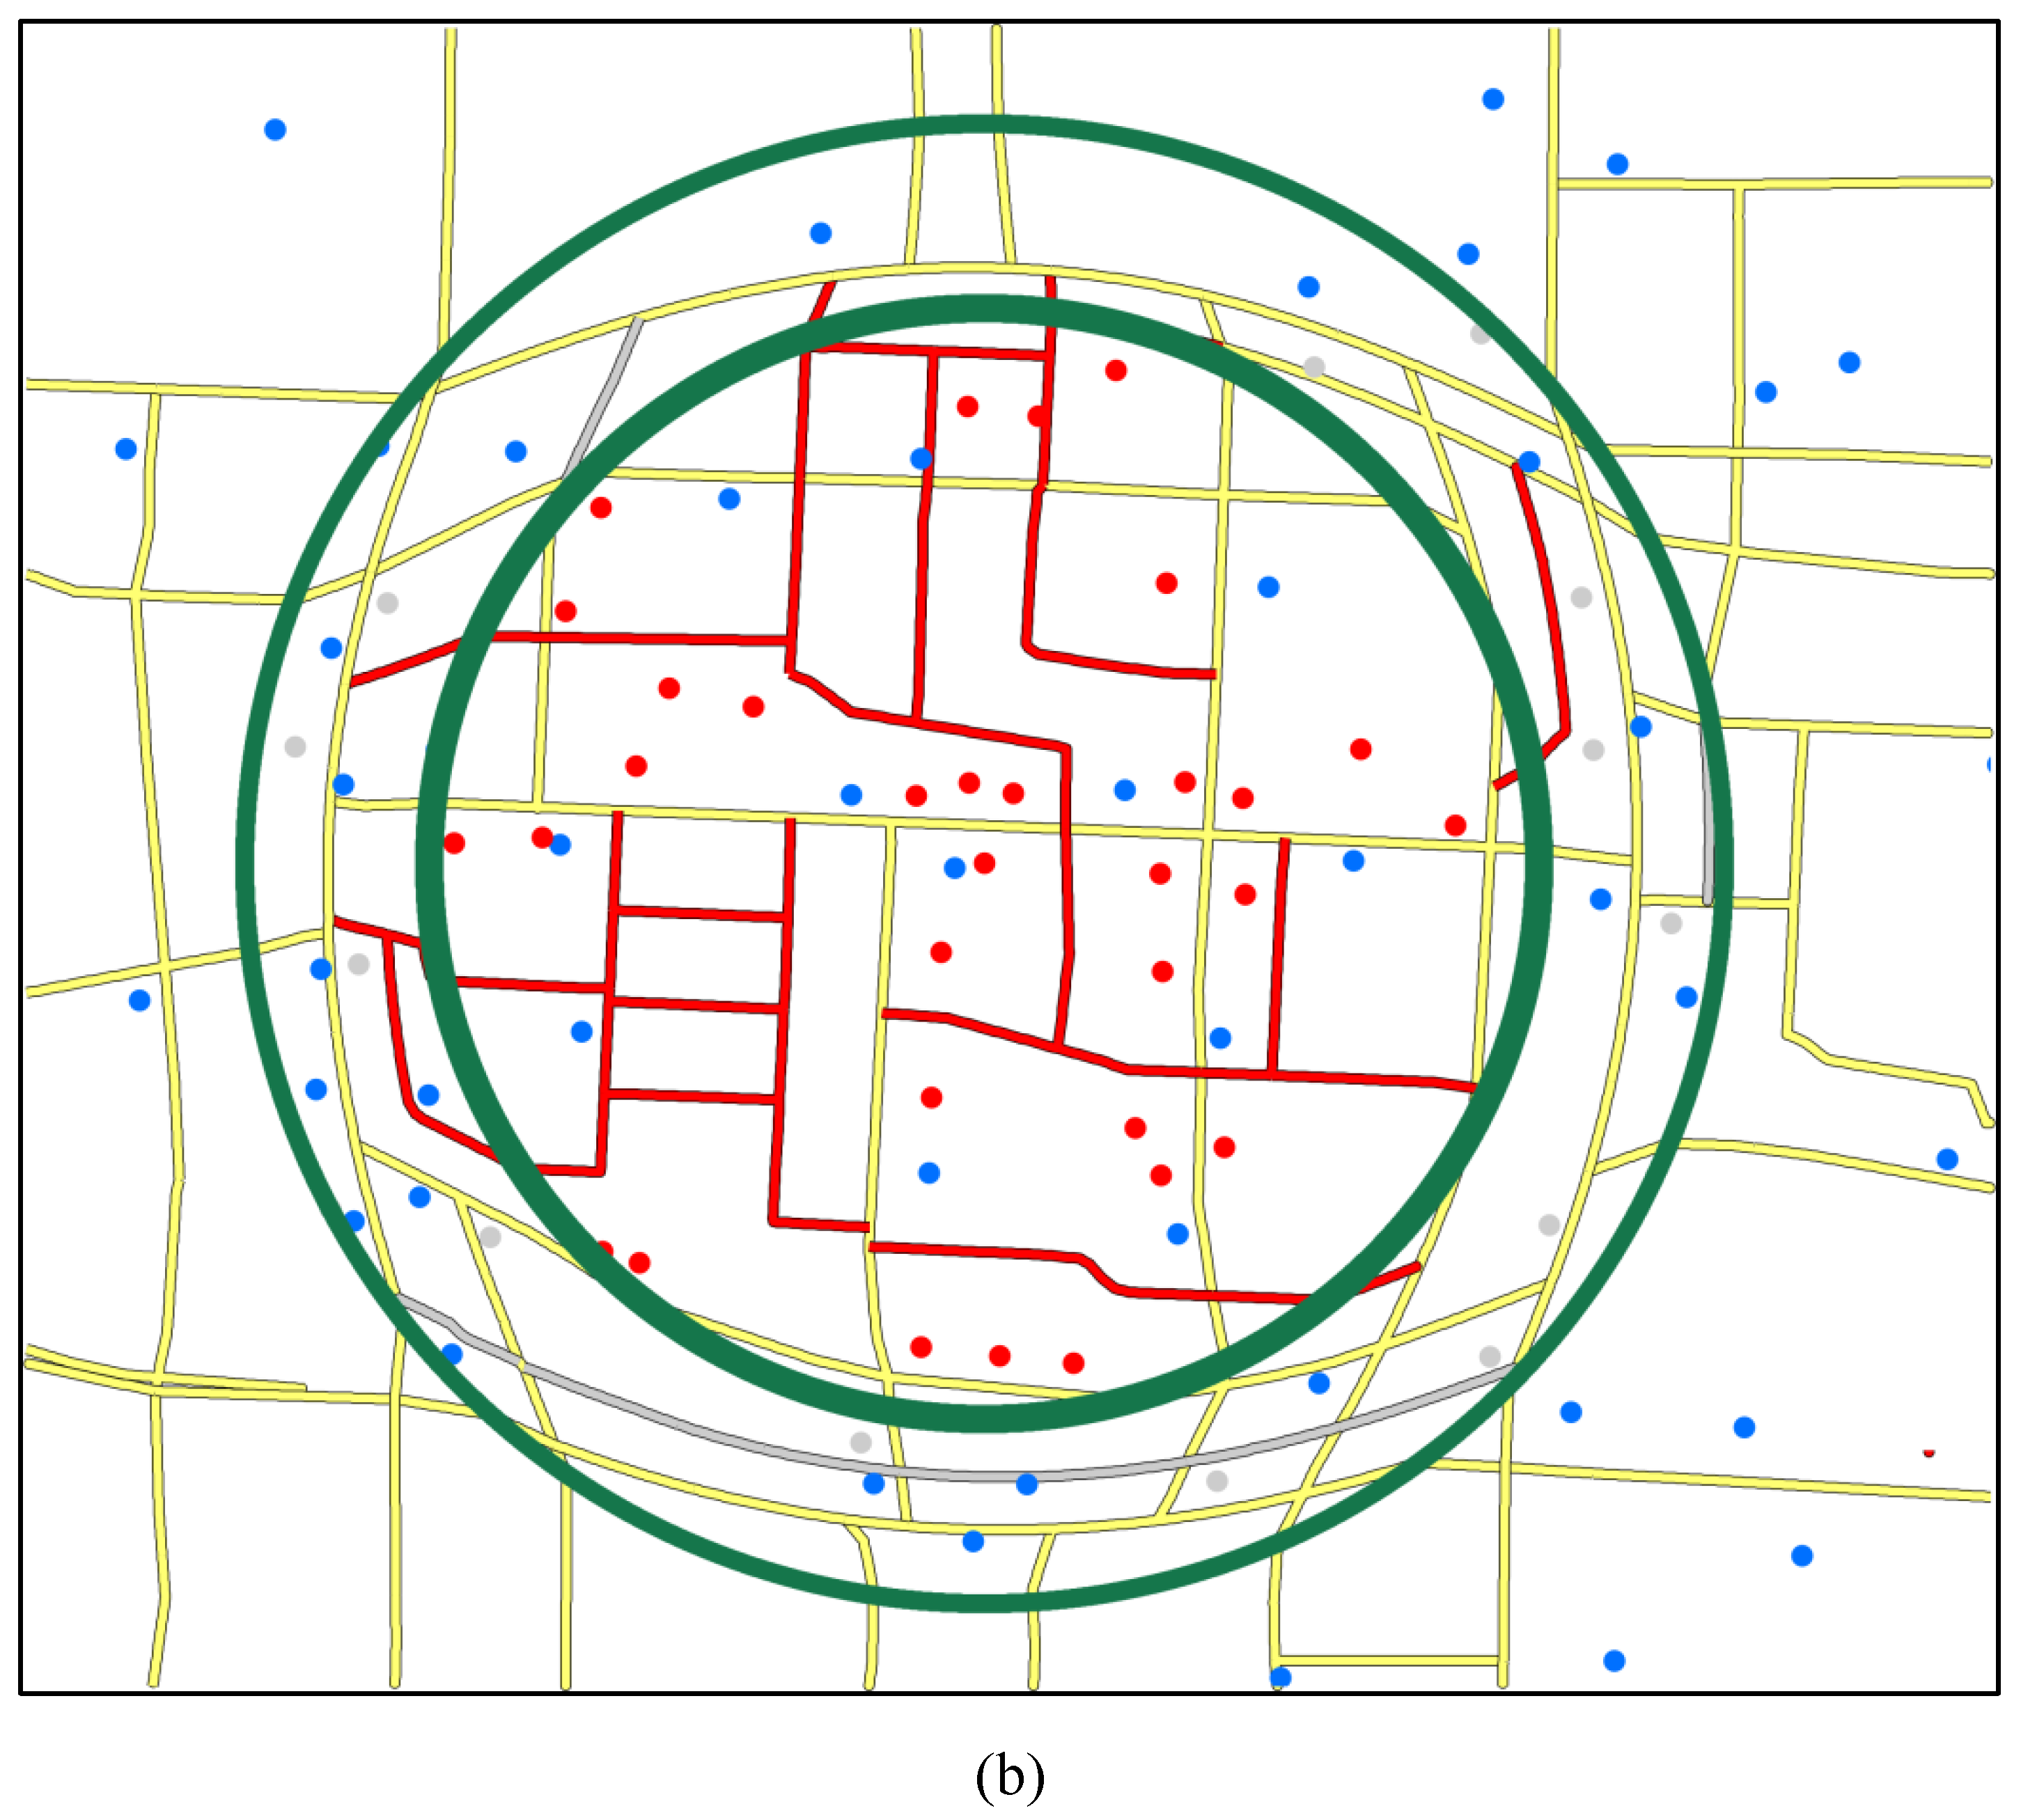 IJGI | Free Full-Text | A Method for Generating Variable-Scale Maps for ...